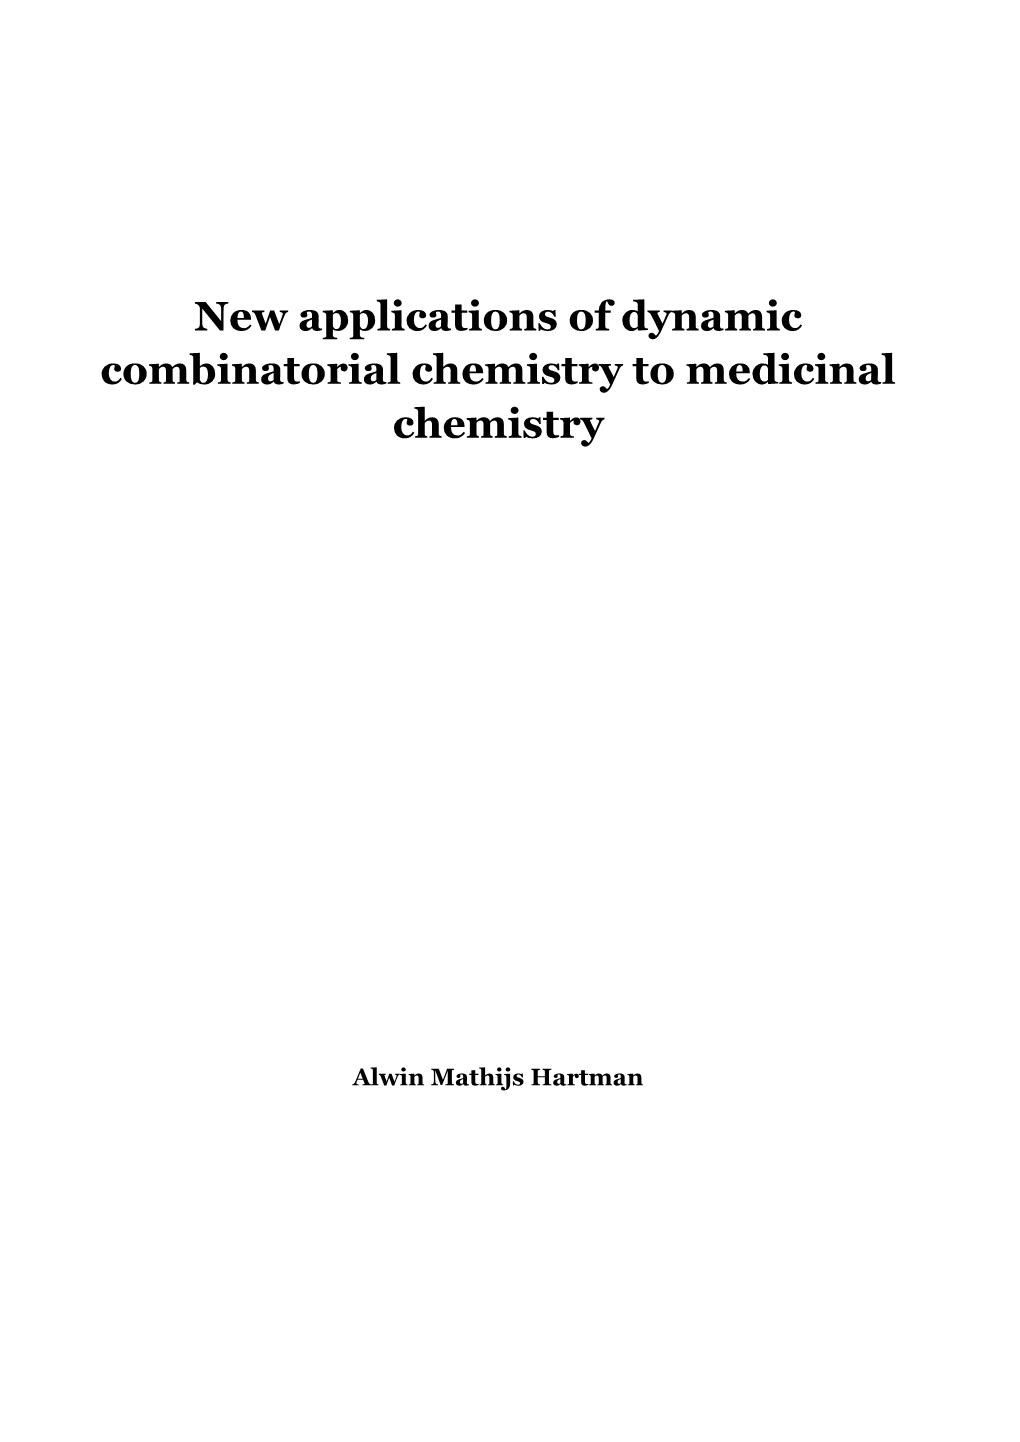 New Applications of Dynamic Combinatorial Chemistry to Medicinal Chemistry